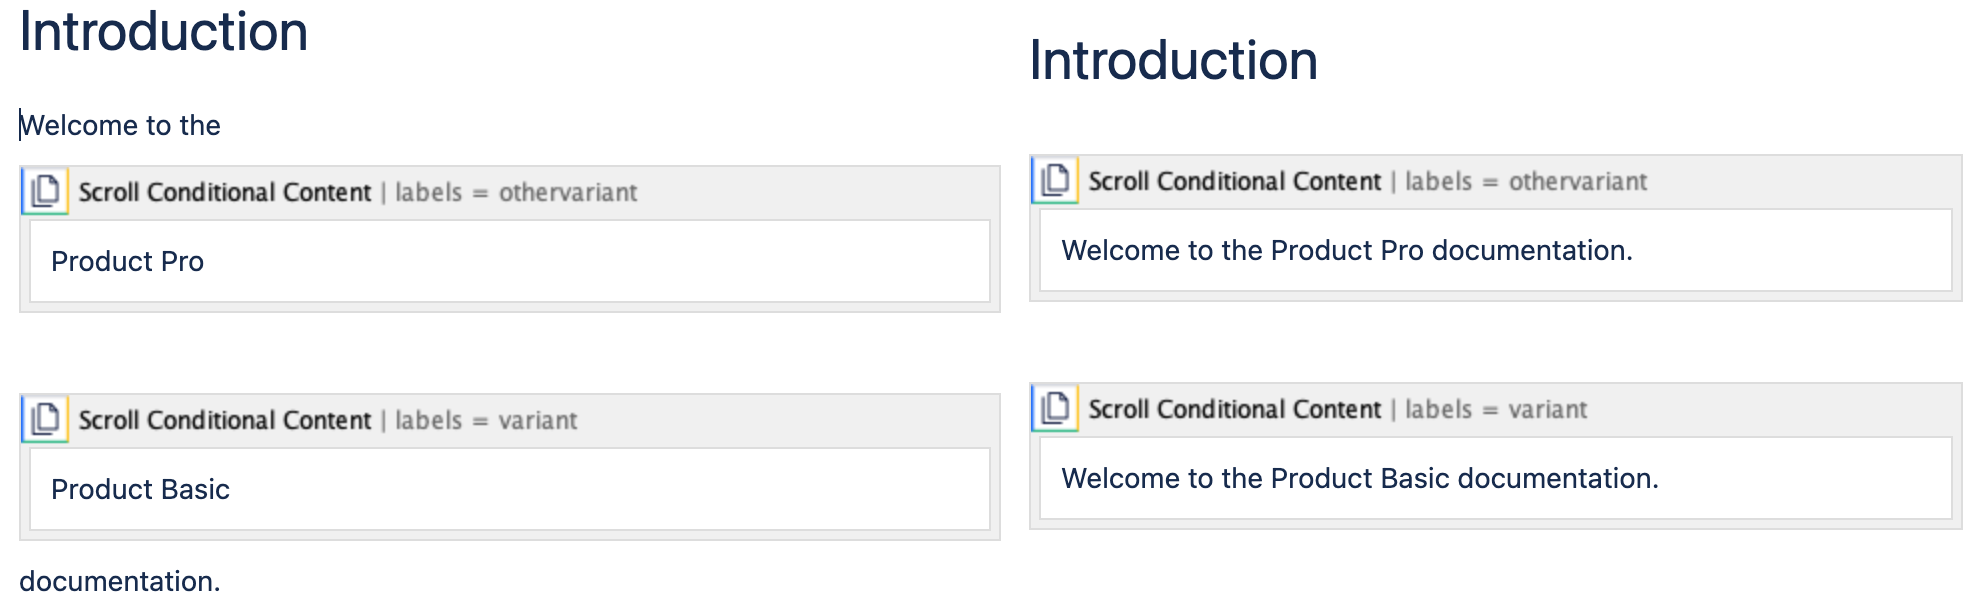 Conditional Content macros after conversion to Scroll Documents